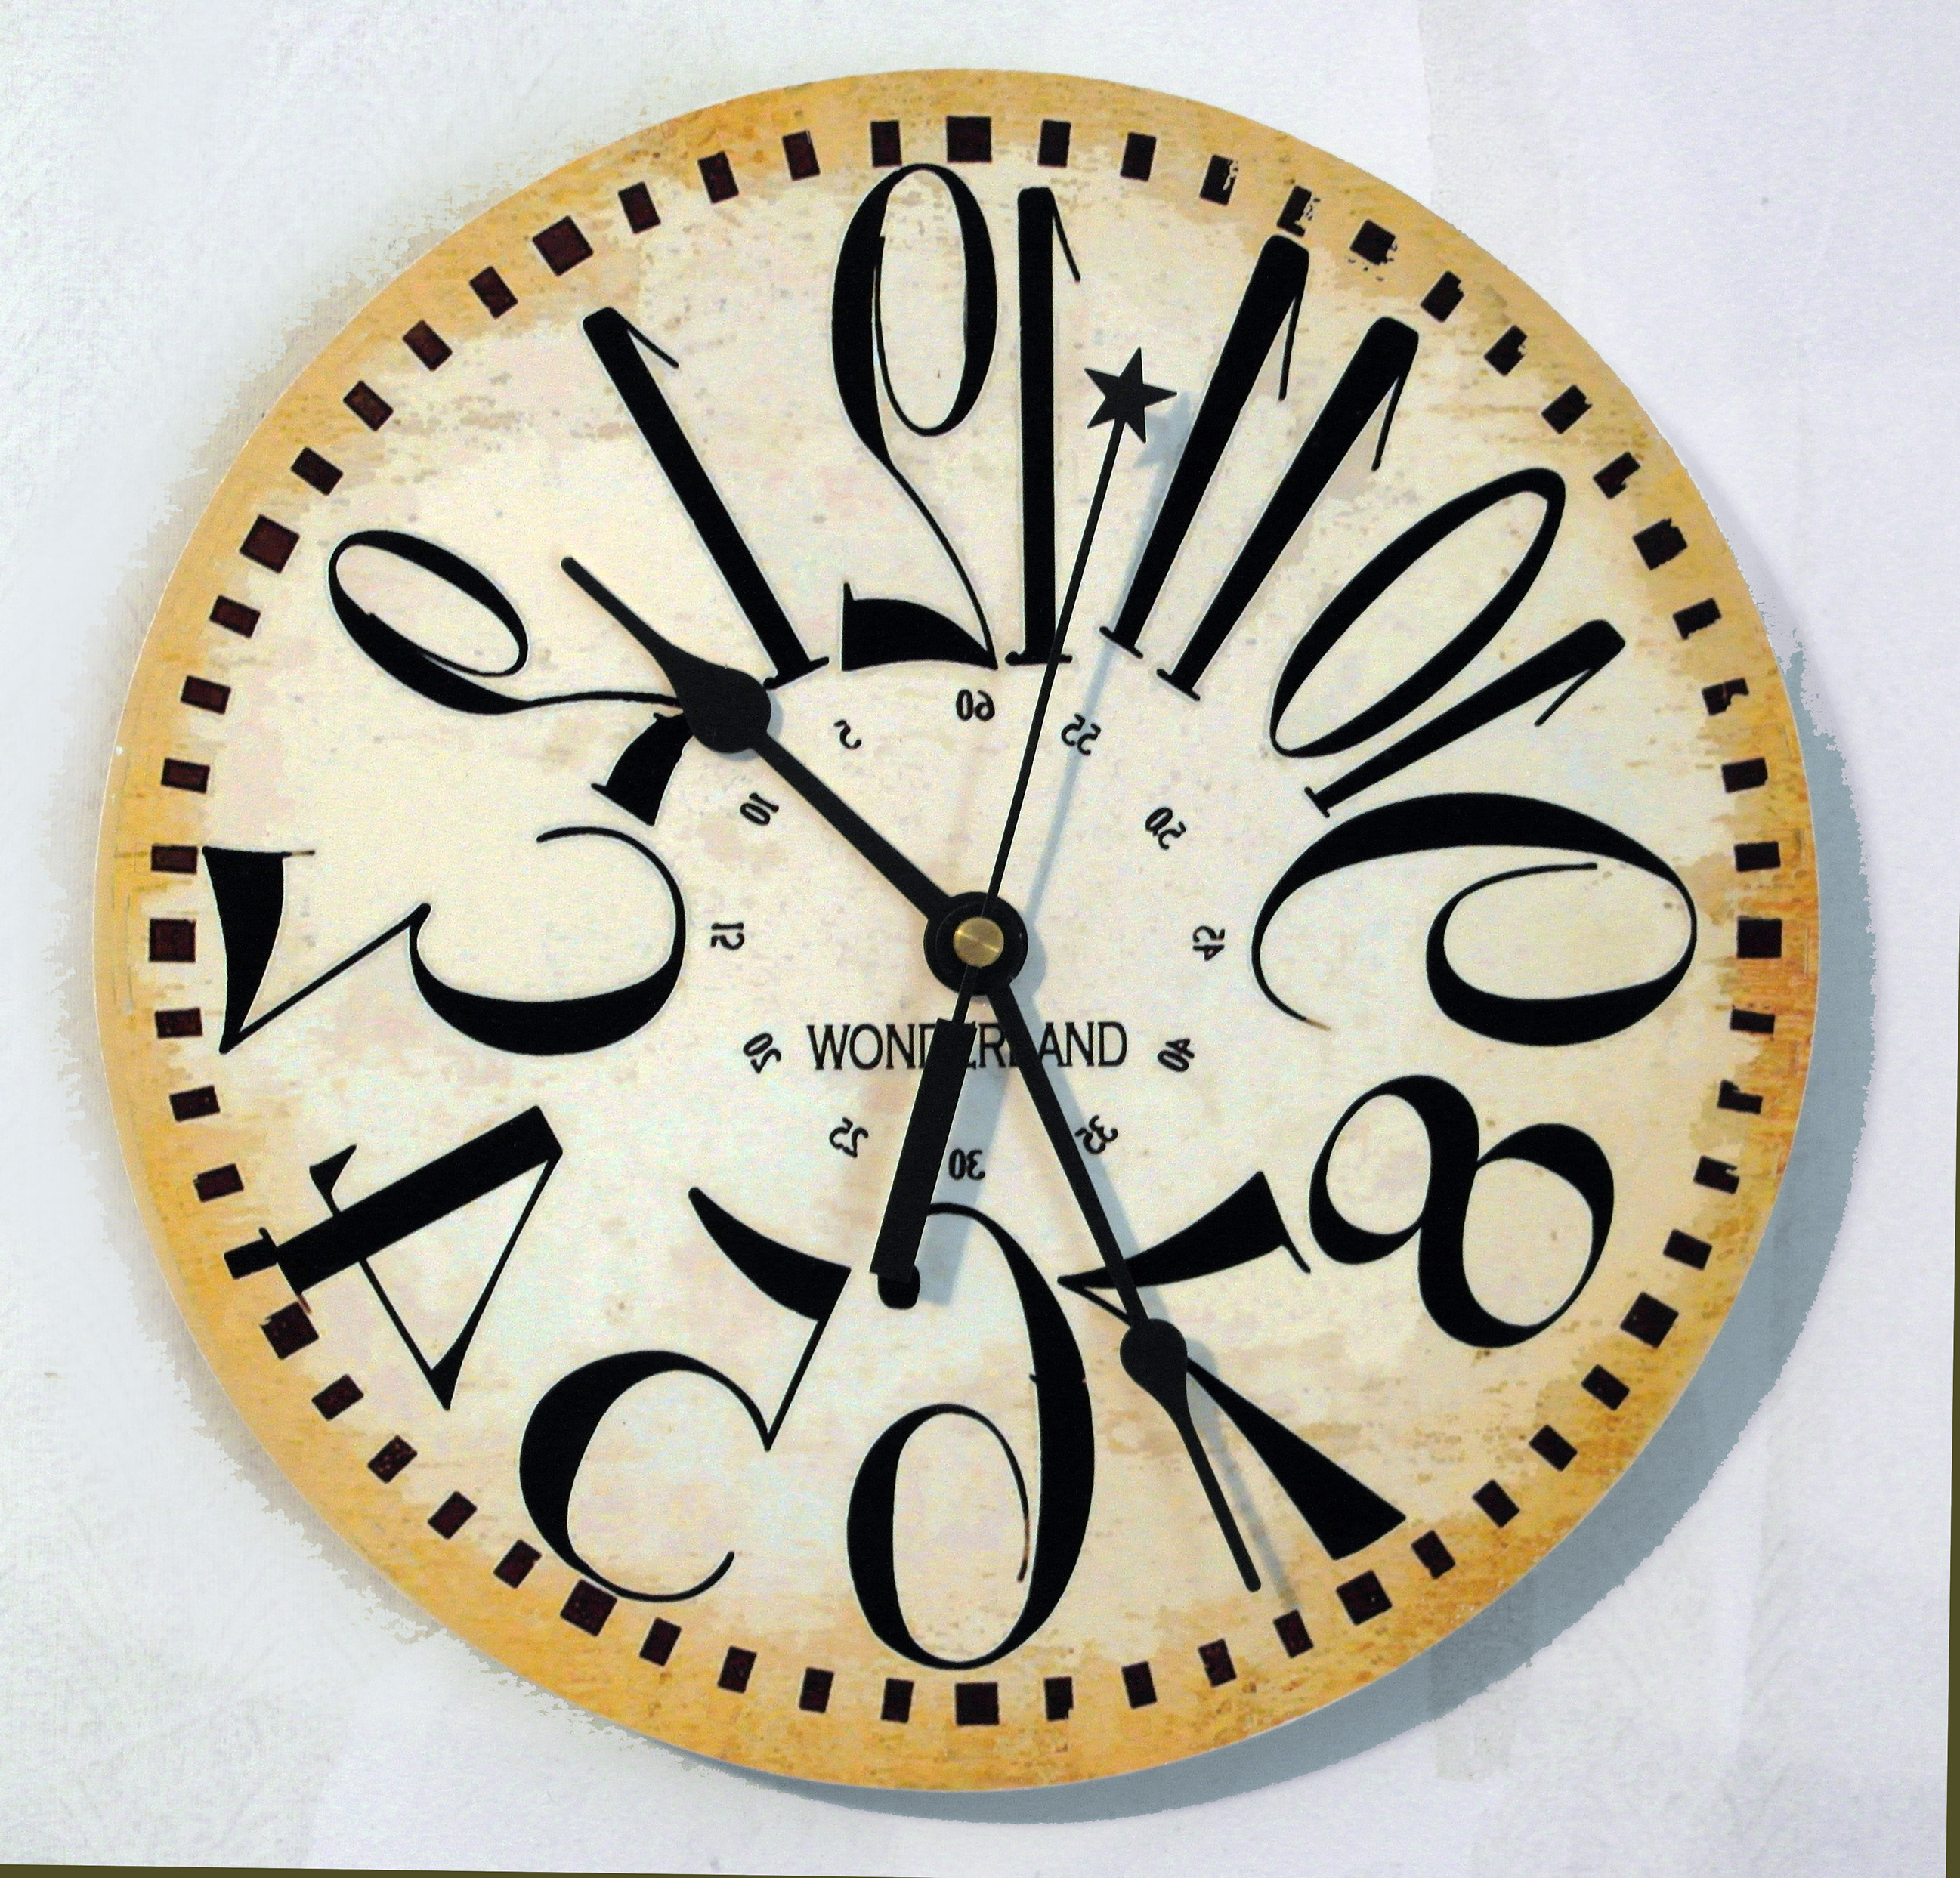 Backwards Clock Rustic Dial , 3 SIZES $36.00 to $52.00   